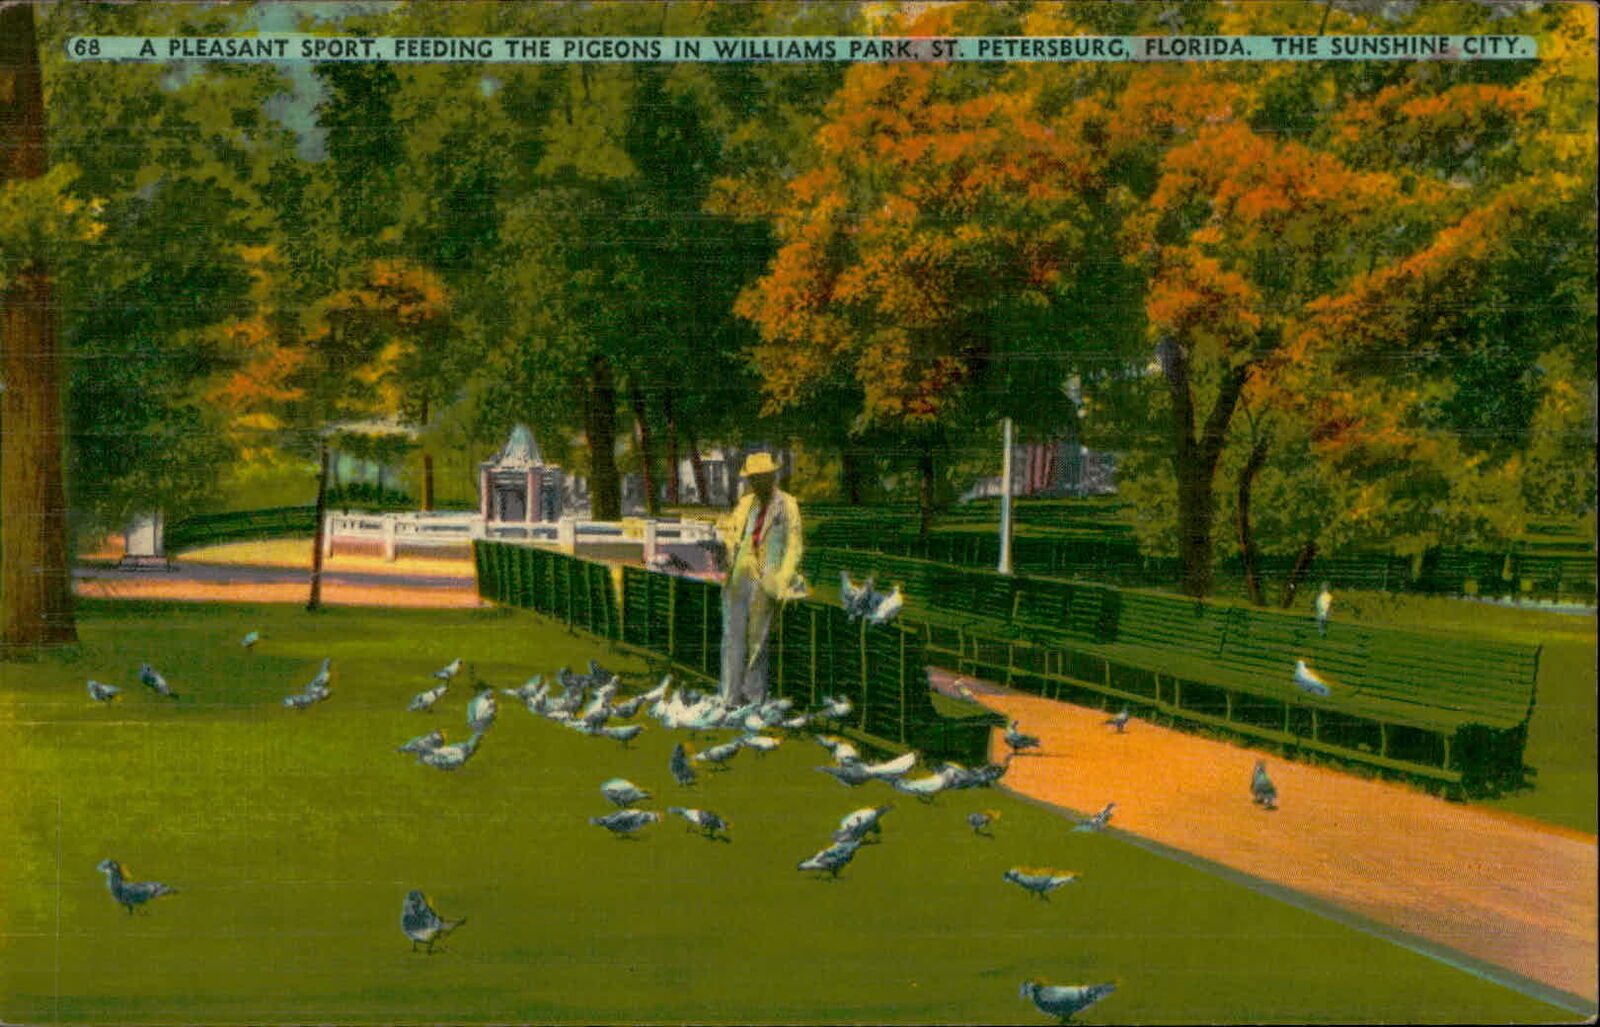 Postcard: 68 A PLEASANT SPORT, FEEDING THE PIGEONS IN WILLIAMS PARK, S